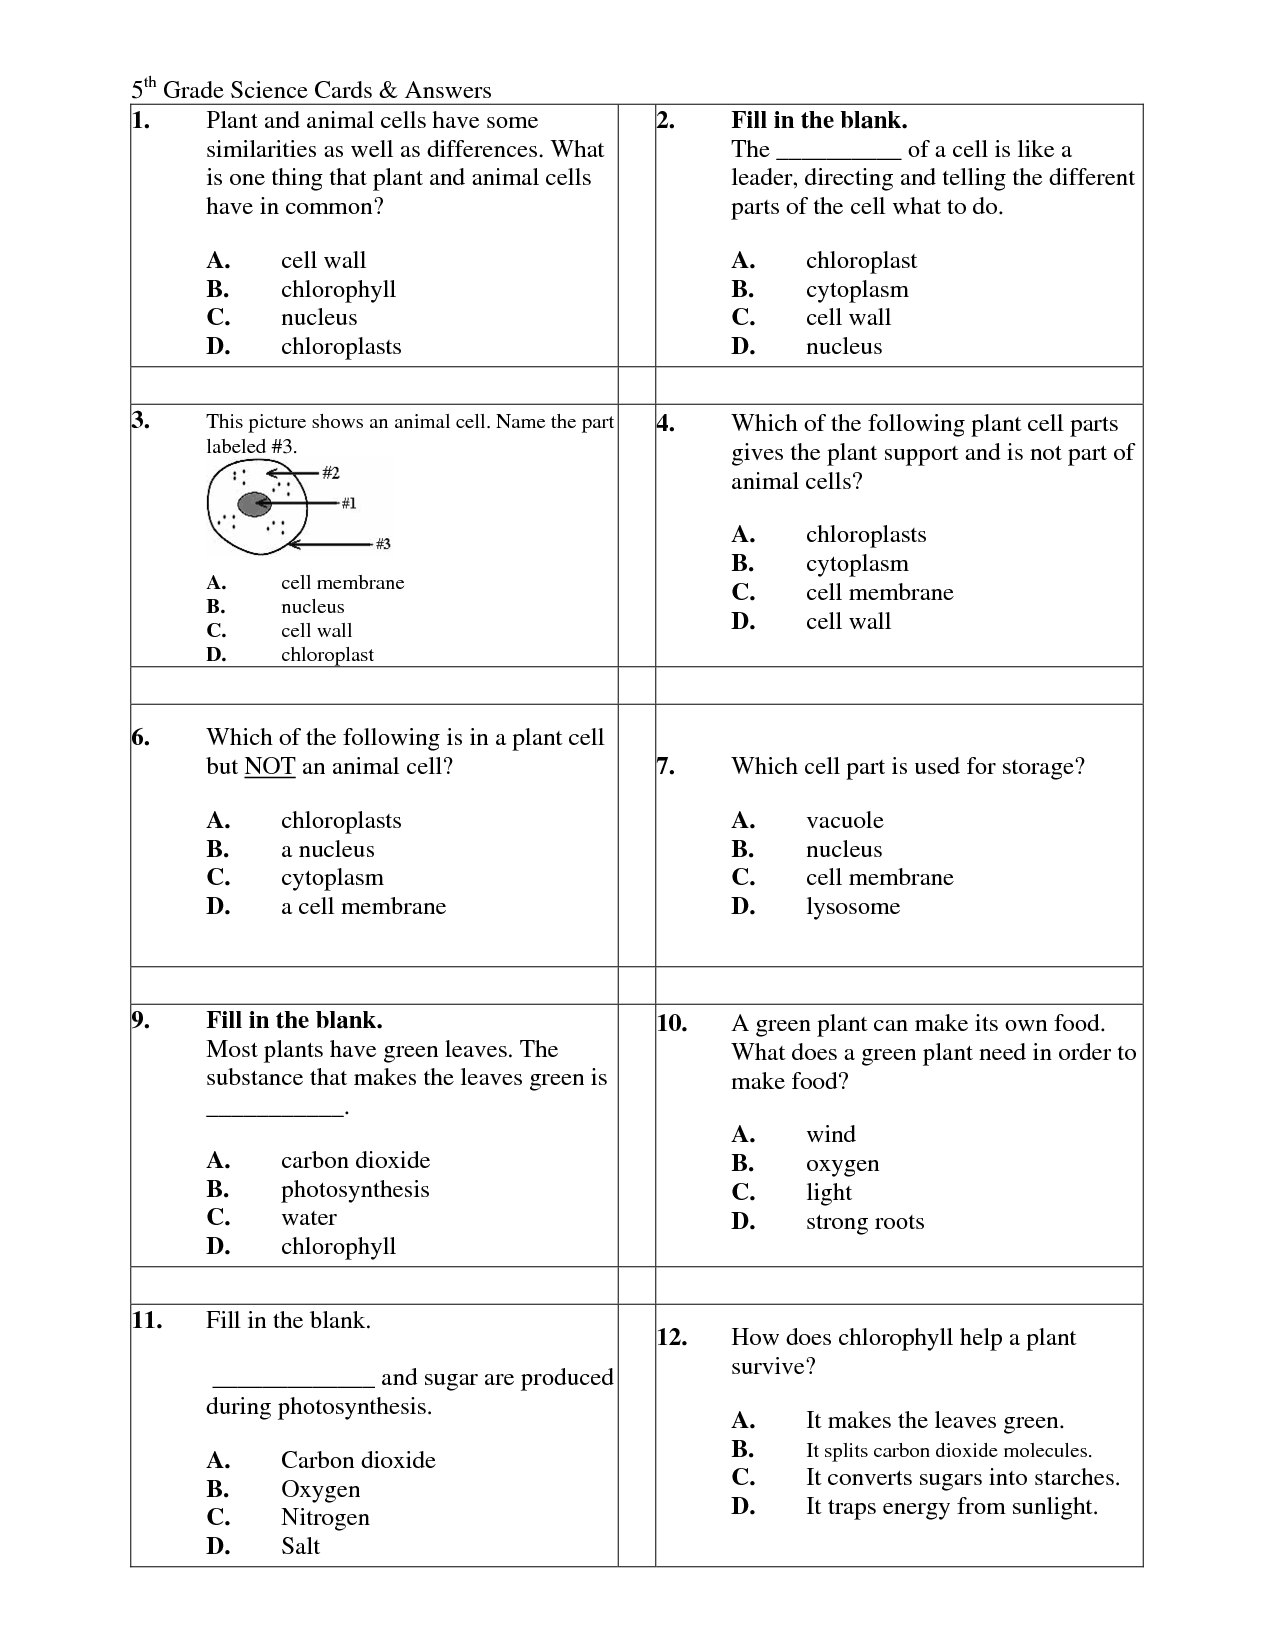 Plant and Animal Cell Worksheets 5th Grade Image